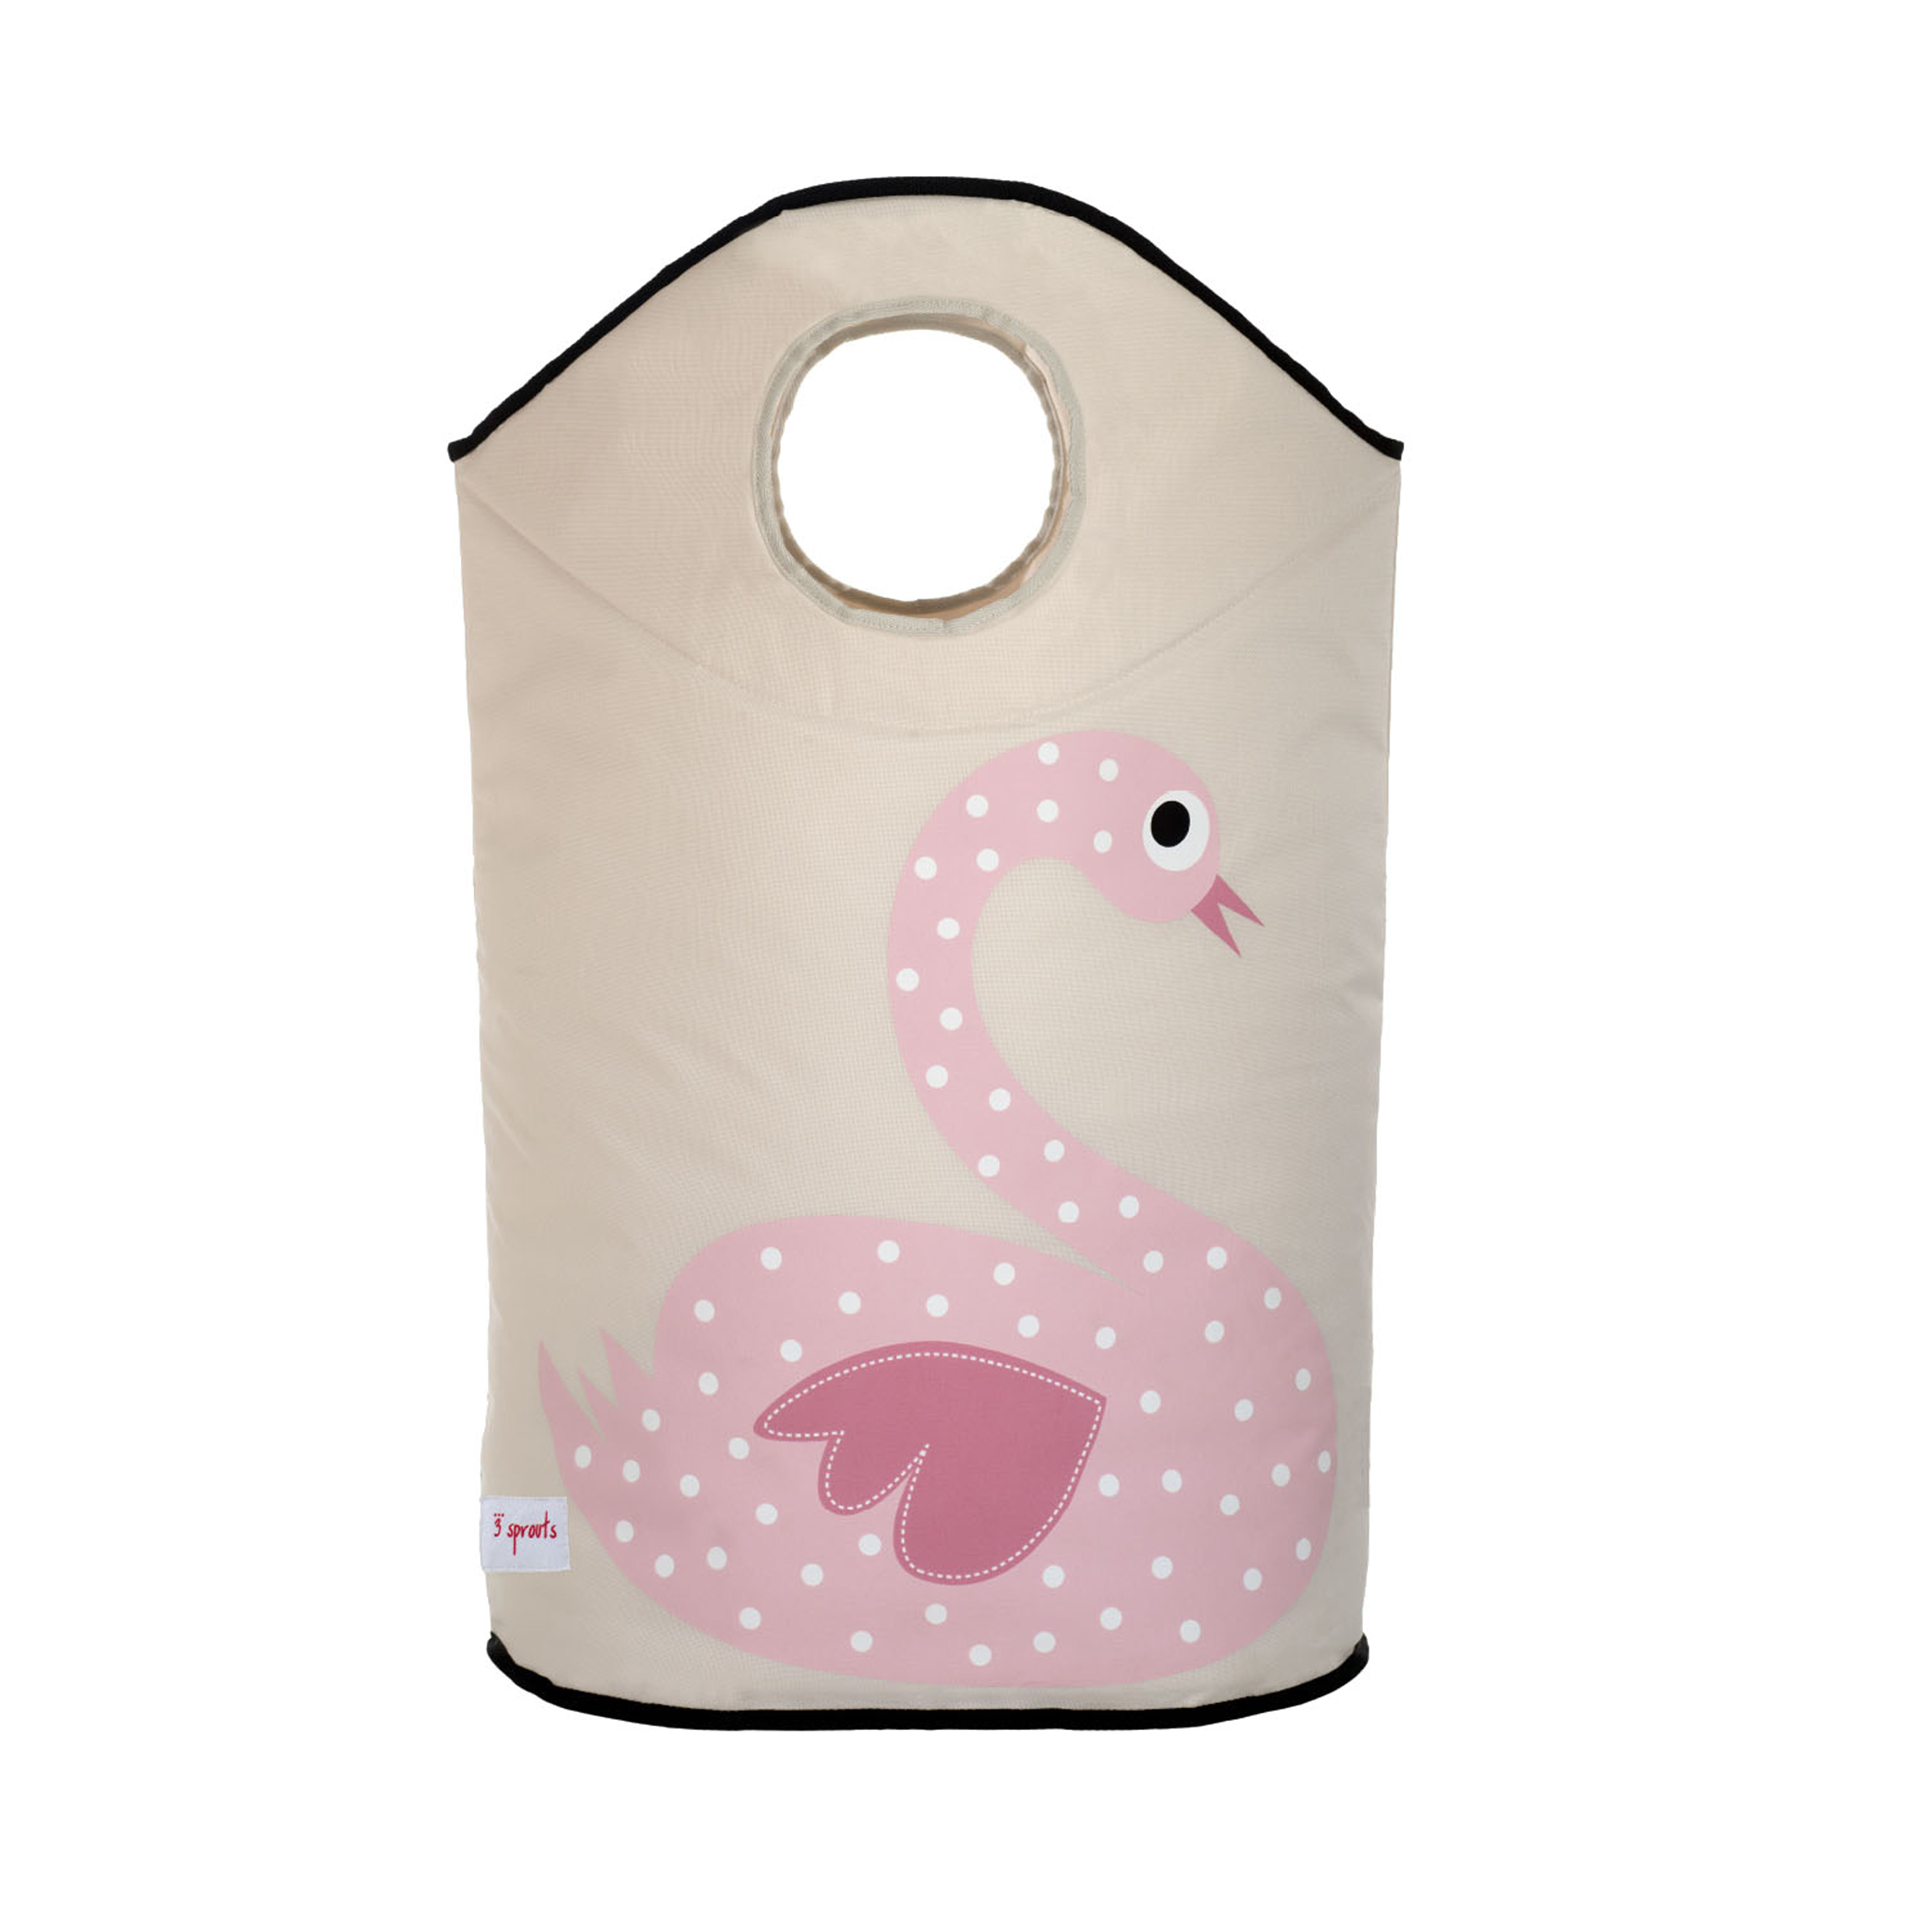 3 Sprouts - Laundry Hamper - Pink Swan